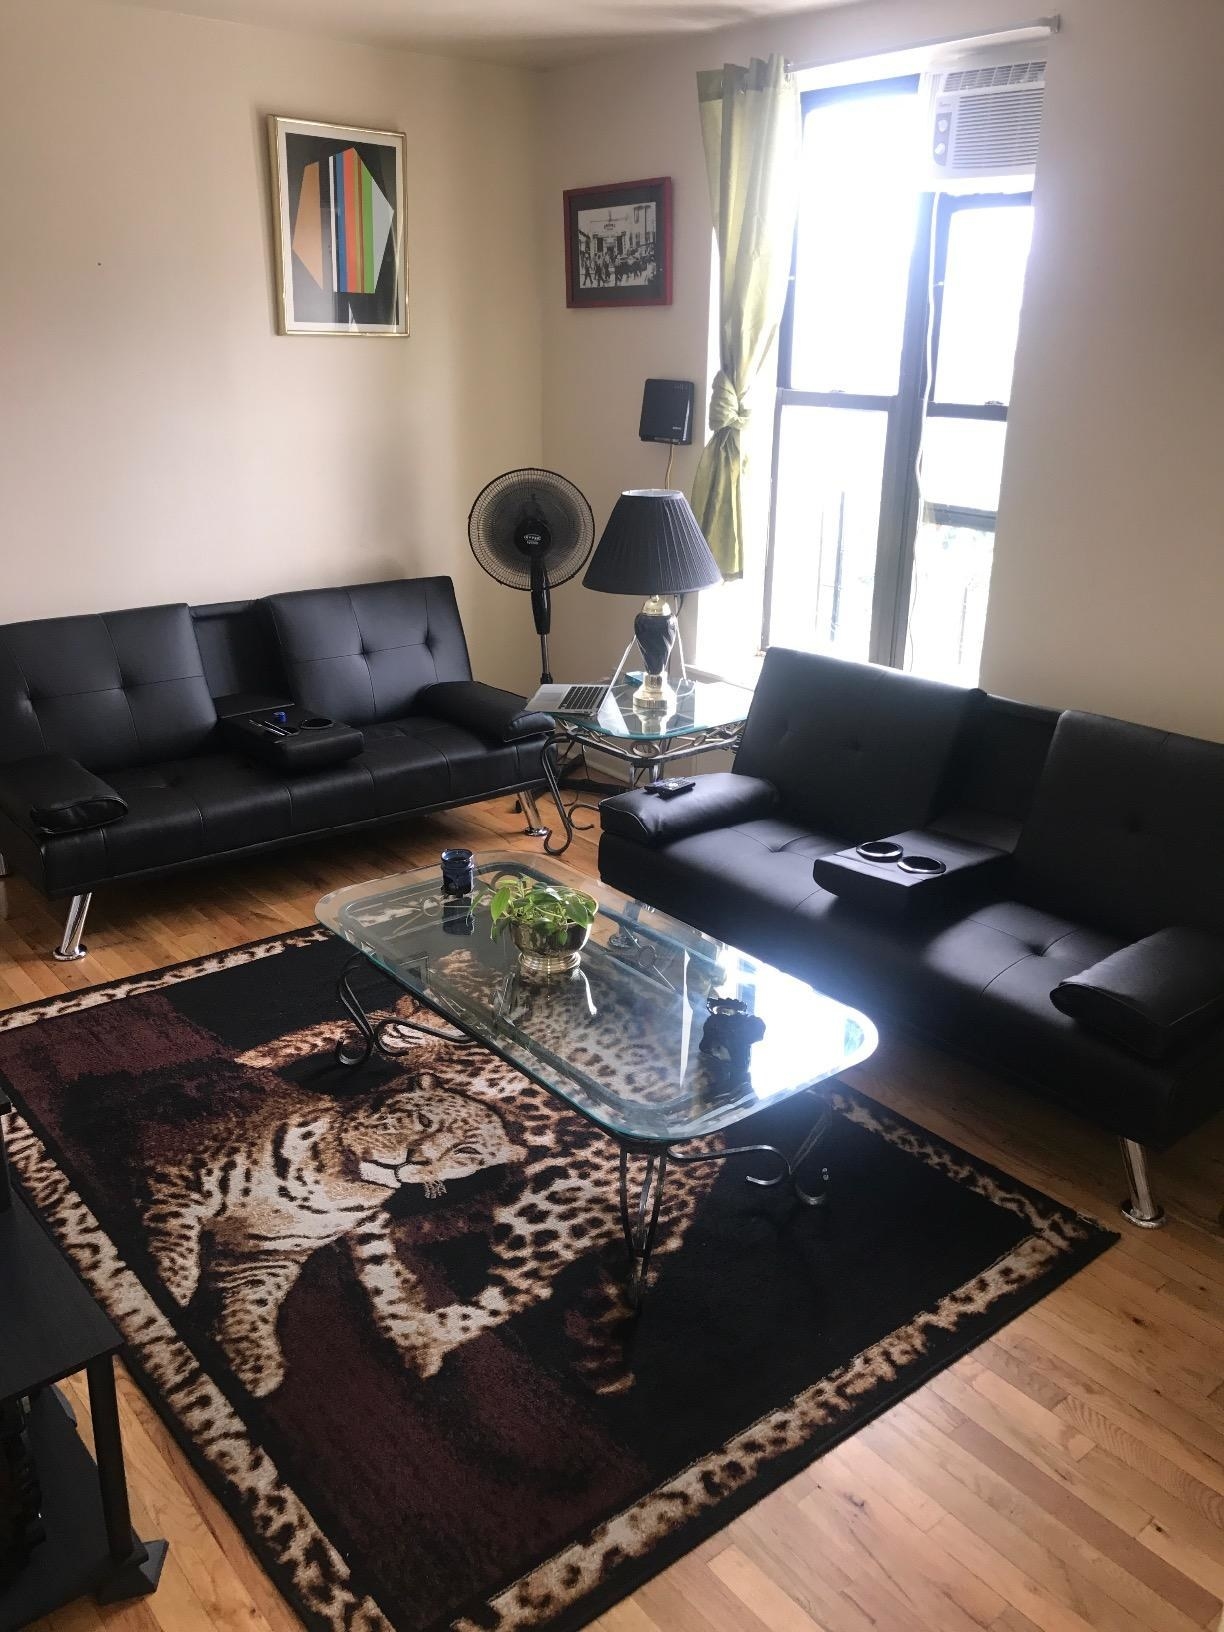 Two of the futons in a living room with this really rad tiger rug in between them. ~Rawr!~